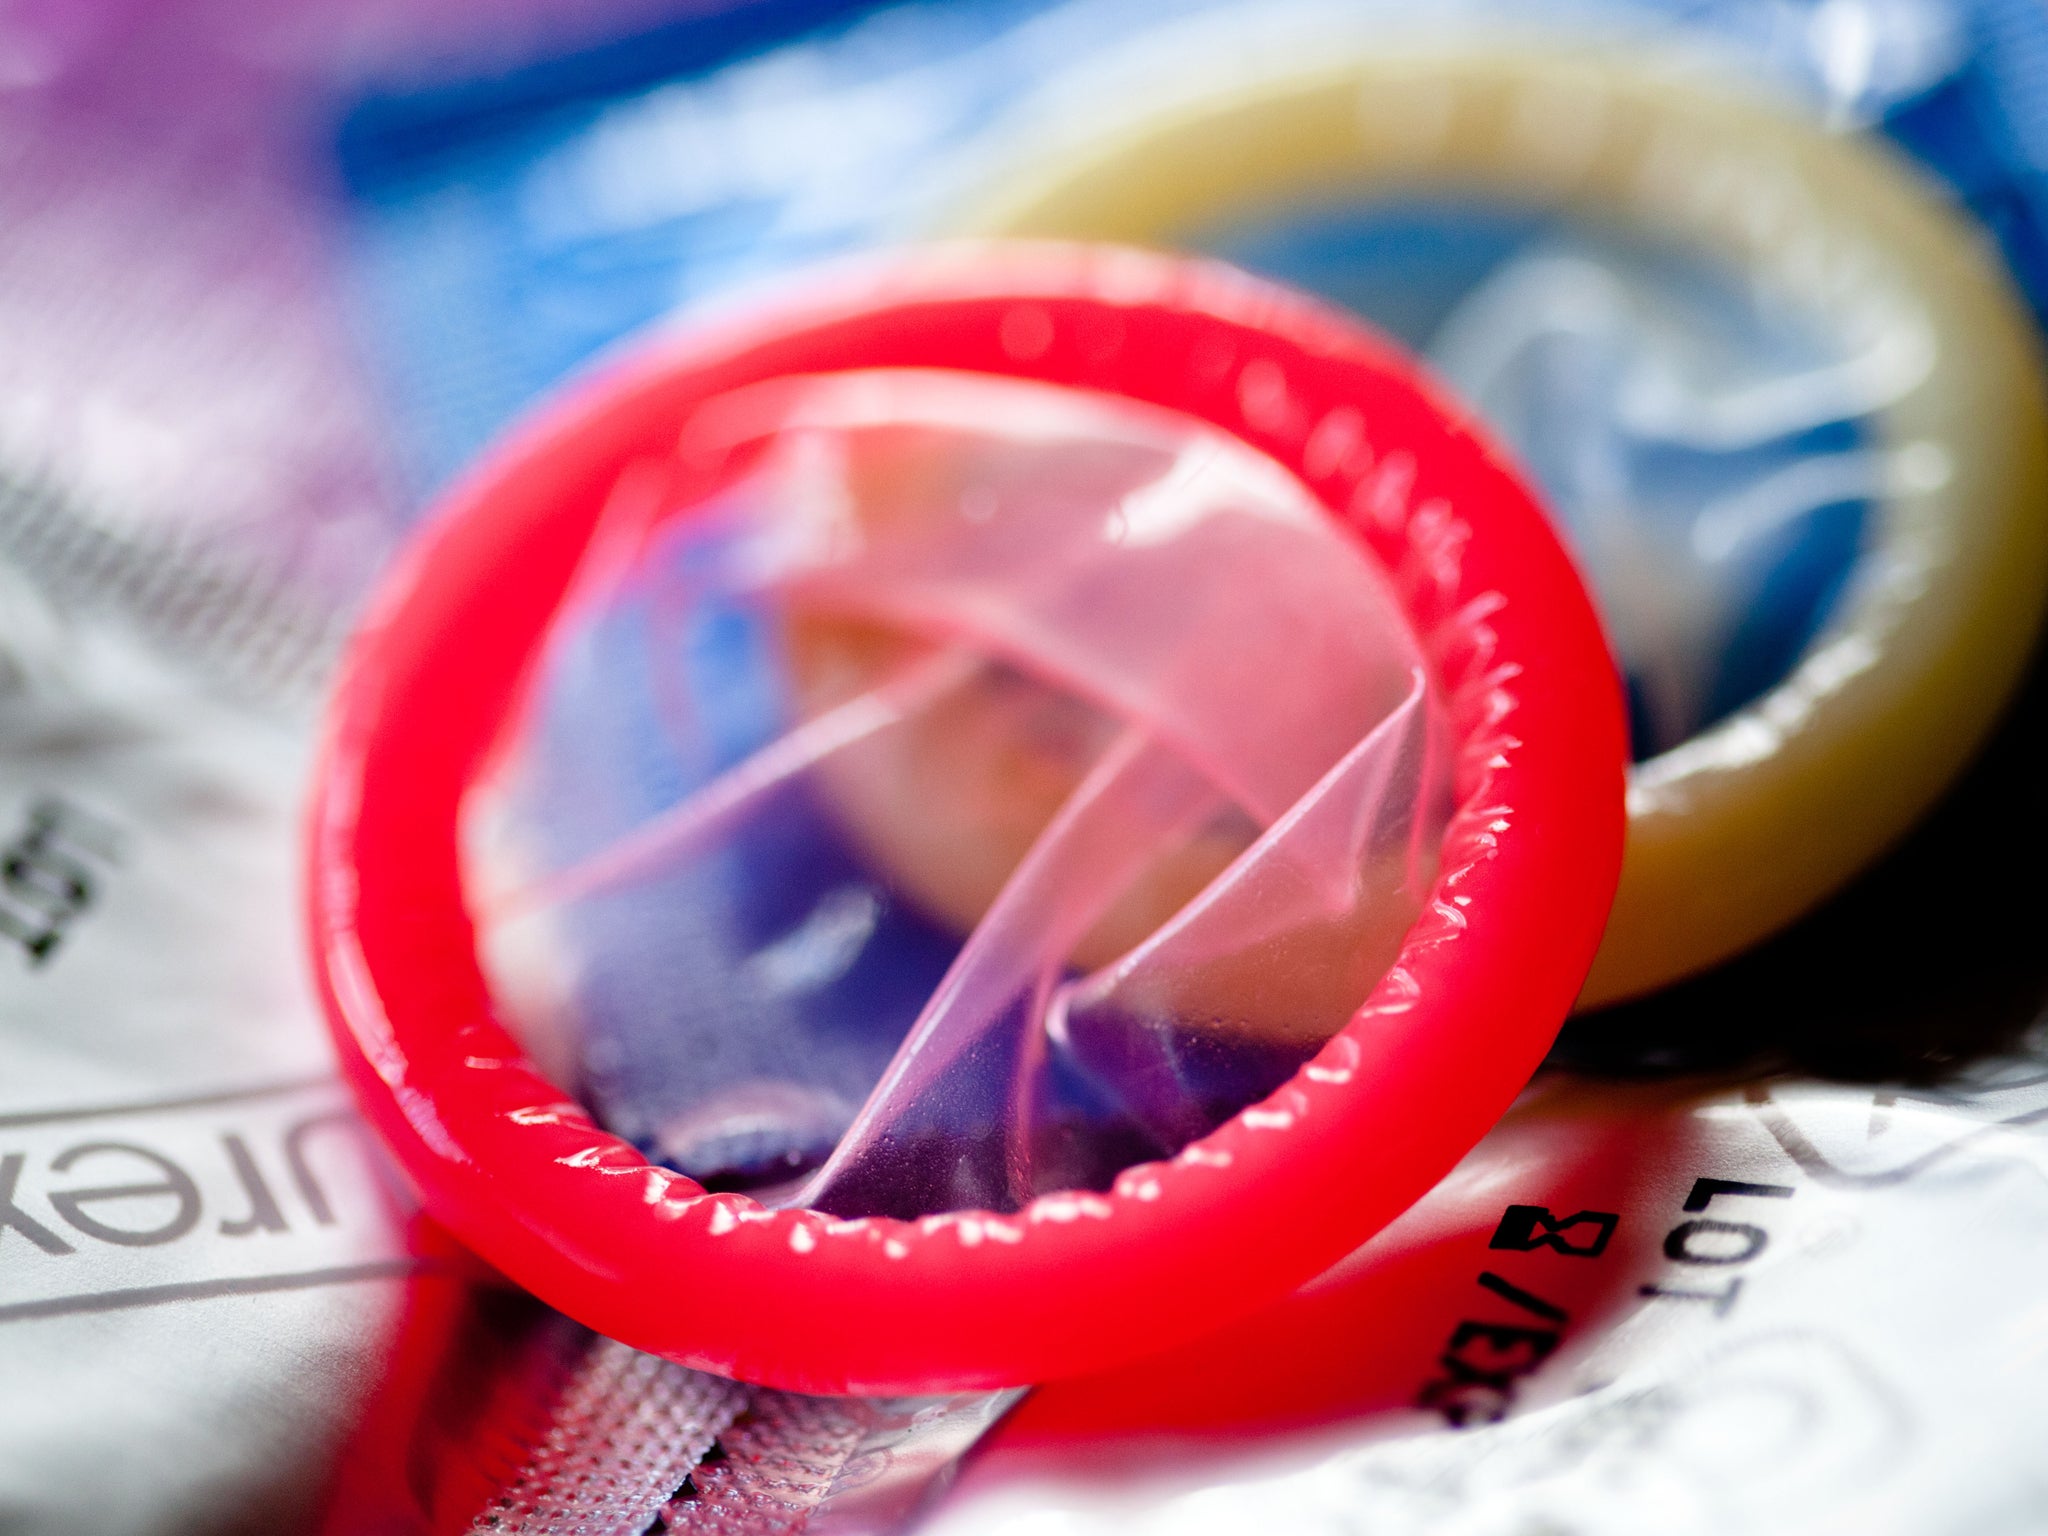 The unsterilised condoms were being sold under the guise of big brand names such as Durex, Contex and KJissbon